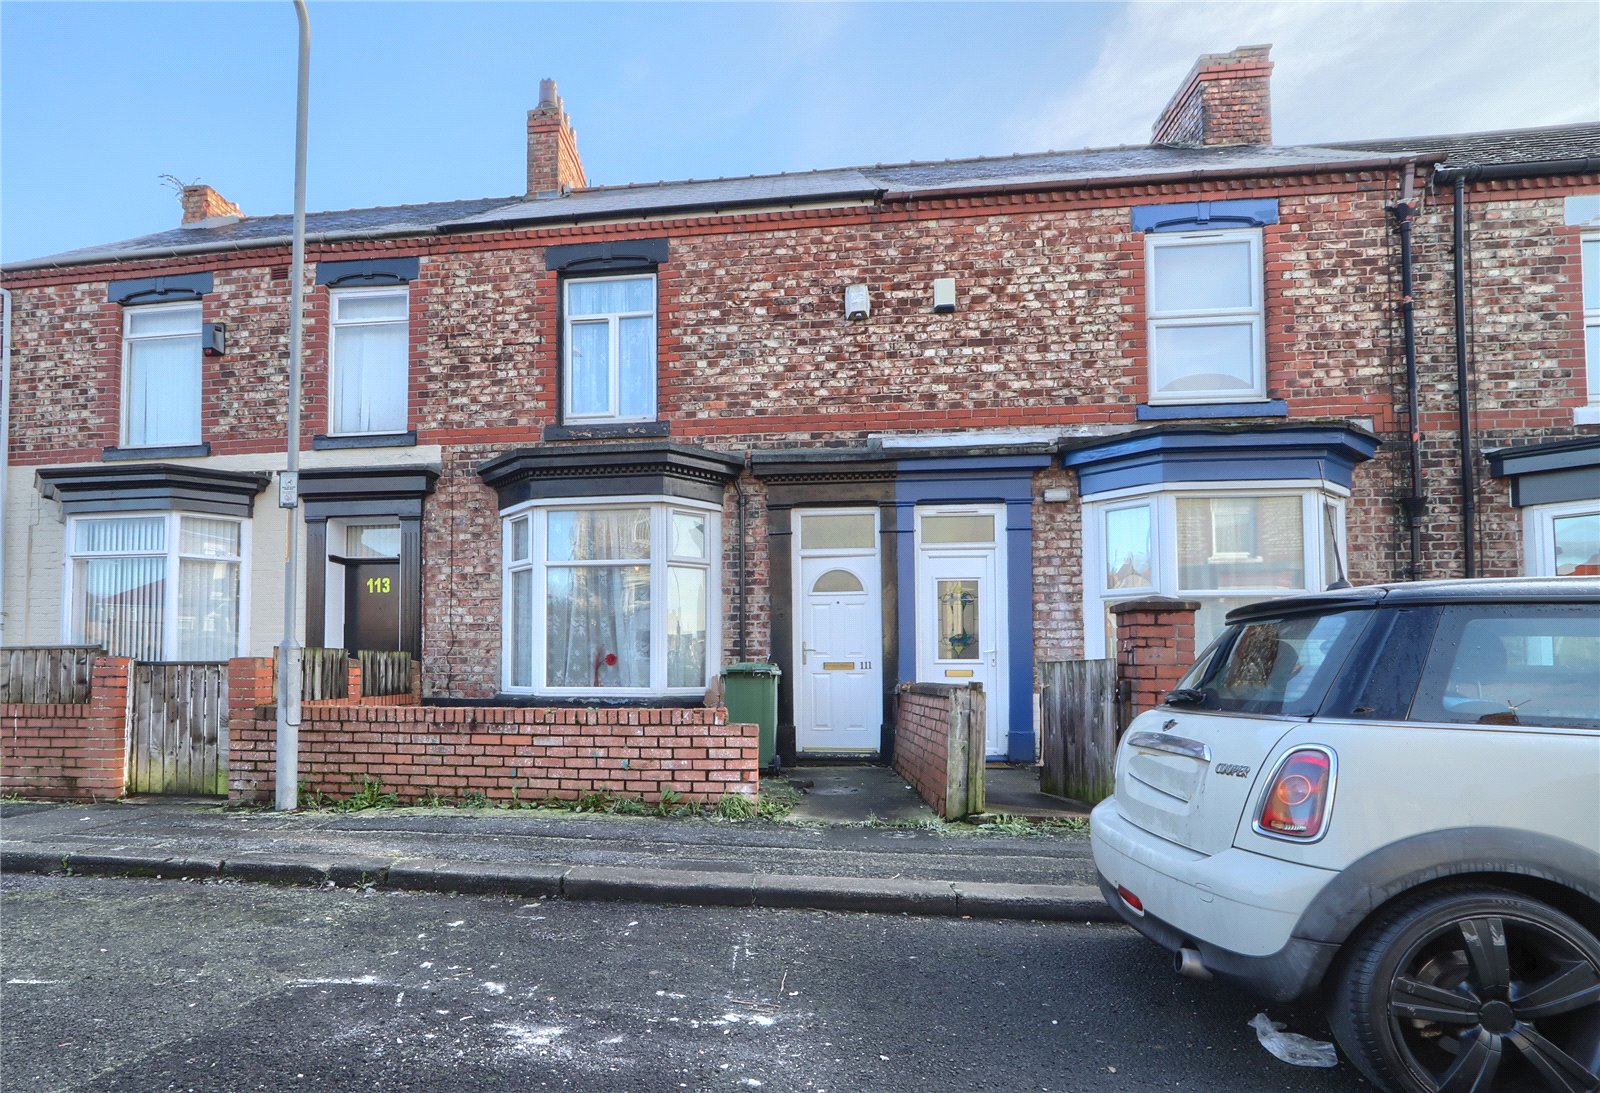 2 bed house for sale in Londonderry Road, Stockton-on-Tees  - Property Image 1